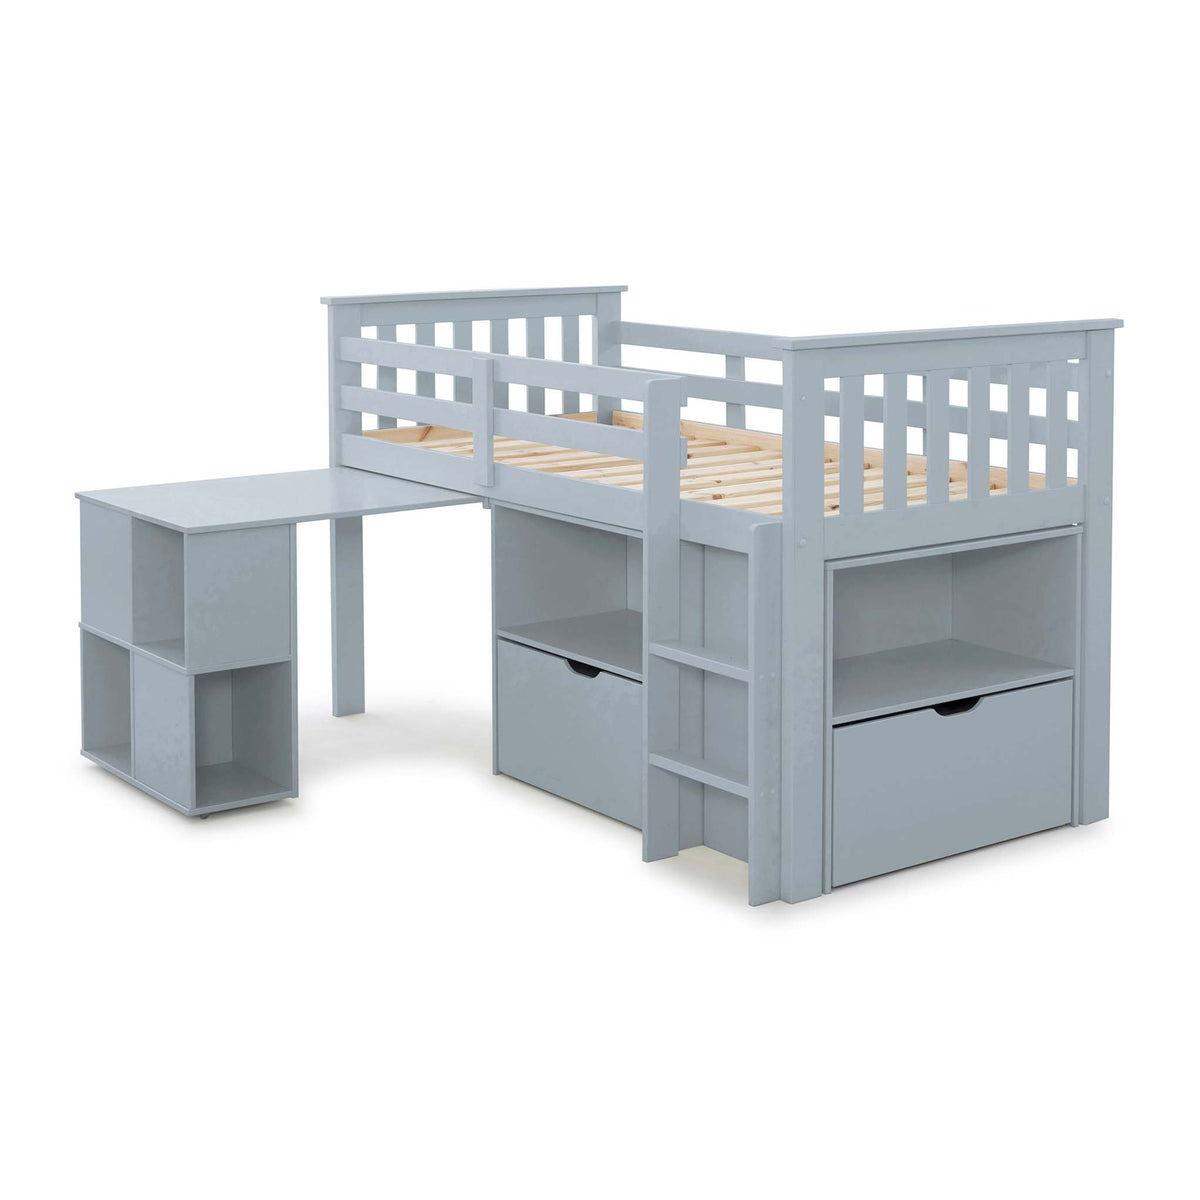 Huckerby Grey Childrens Sleep Station Storage Bed with pull out table